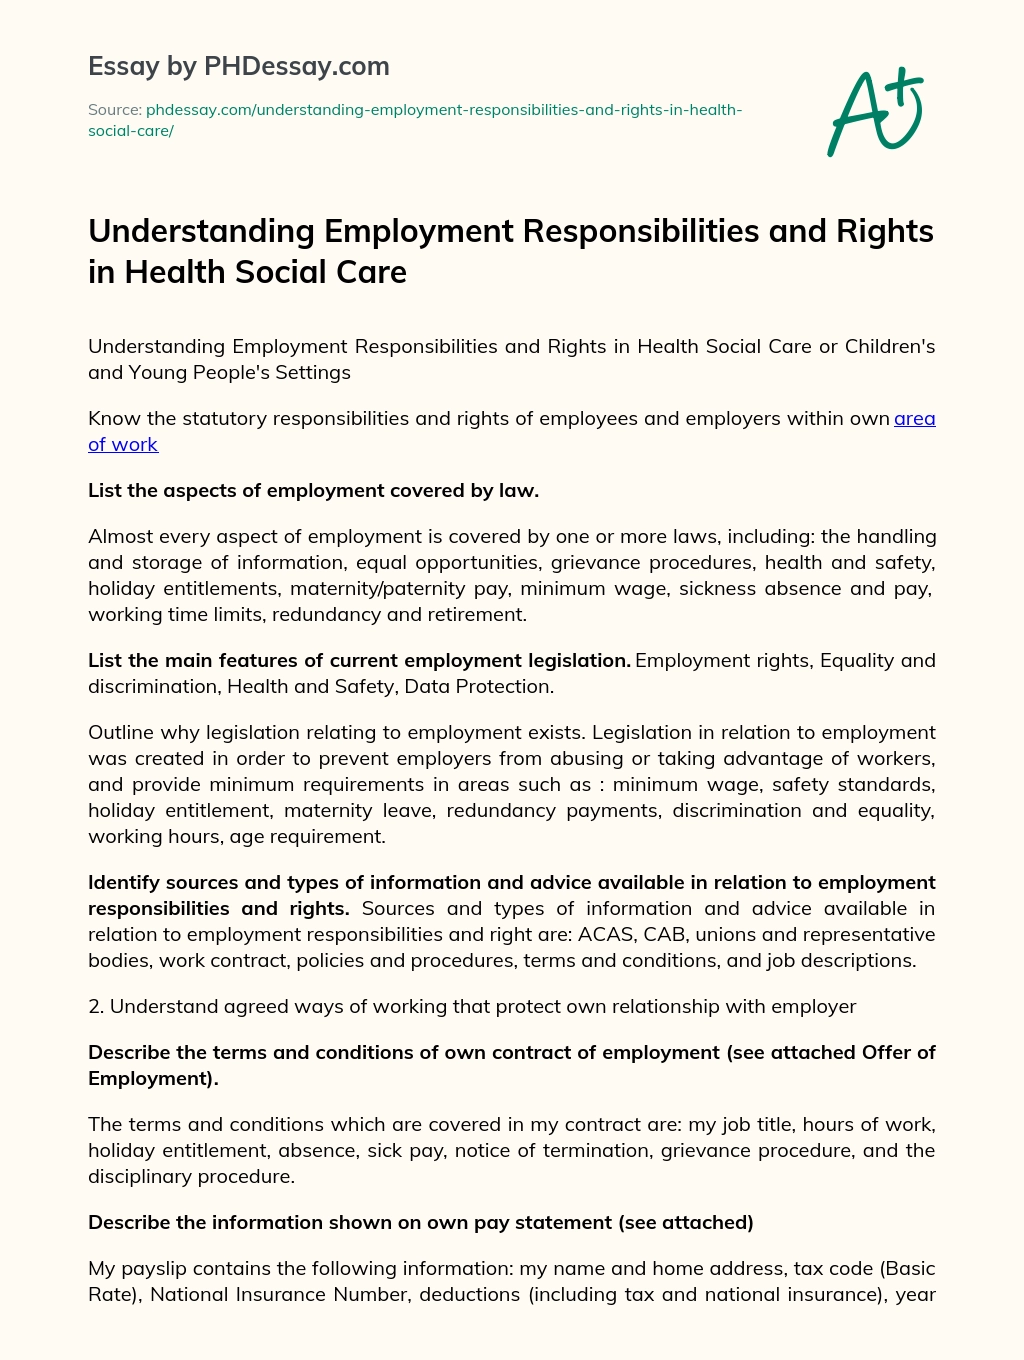 Understanding Employment Responsibilities and Rights in Health Social Care essay